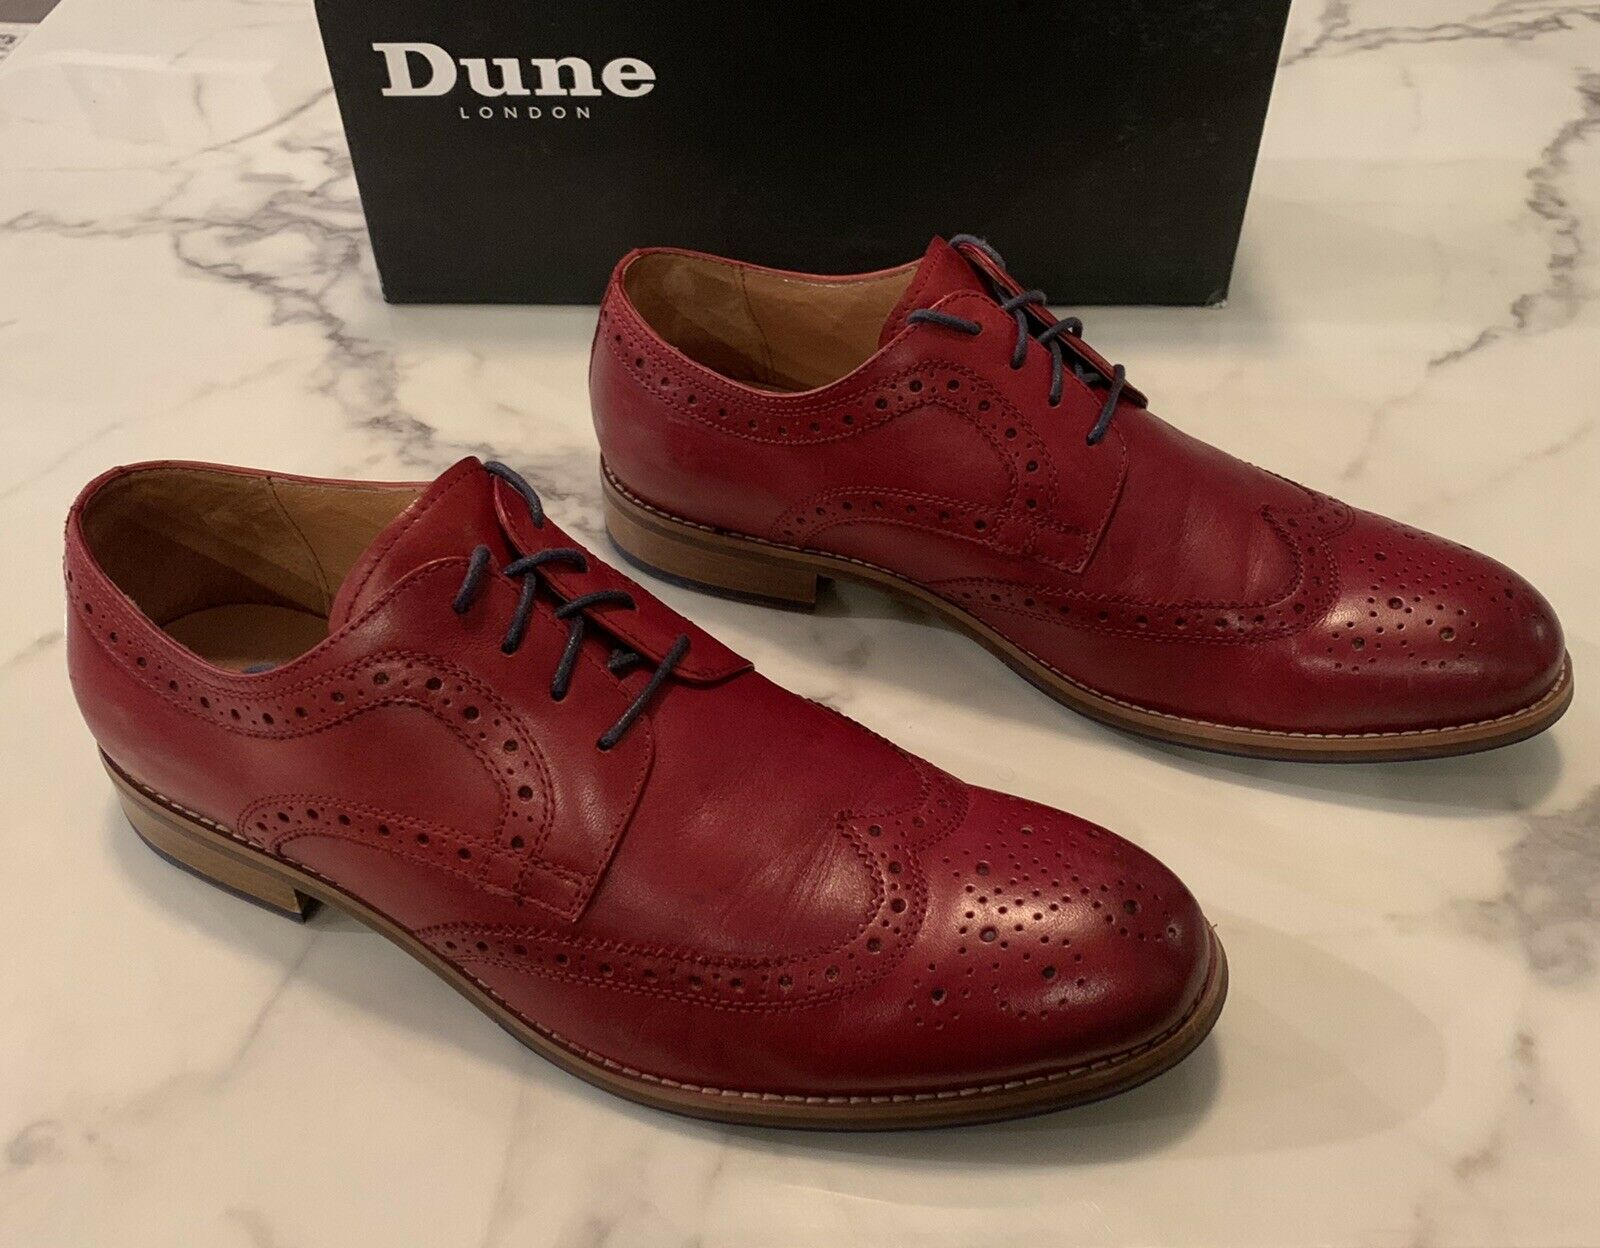 Dune London Mens Shoes Red Leather Radcliffe Size 10.5M